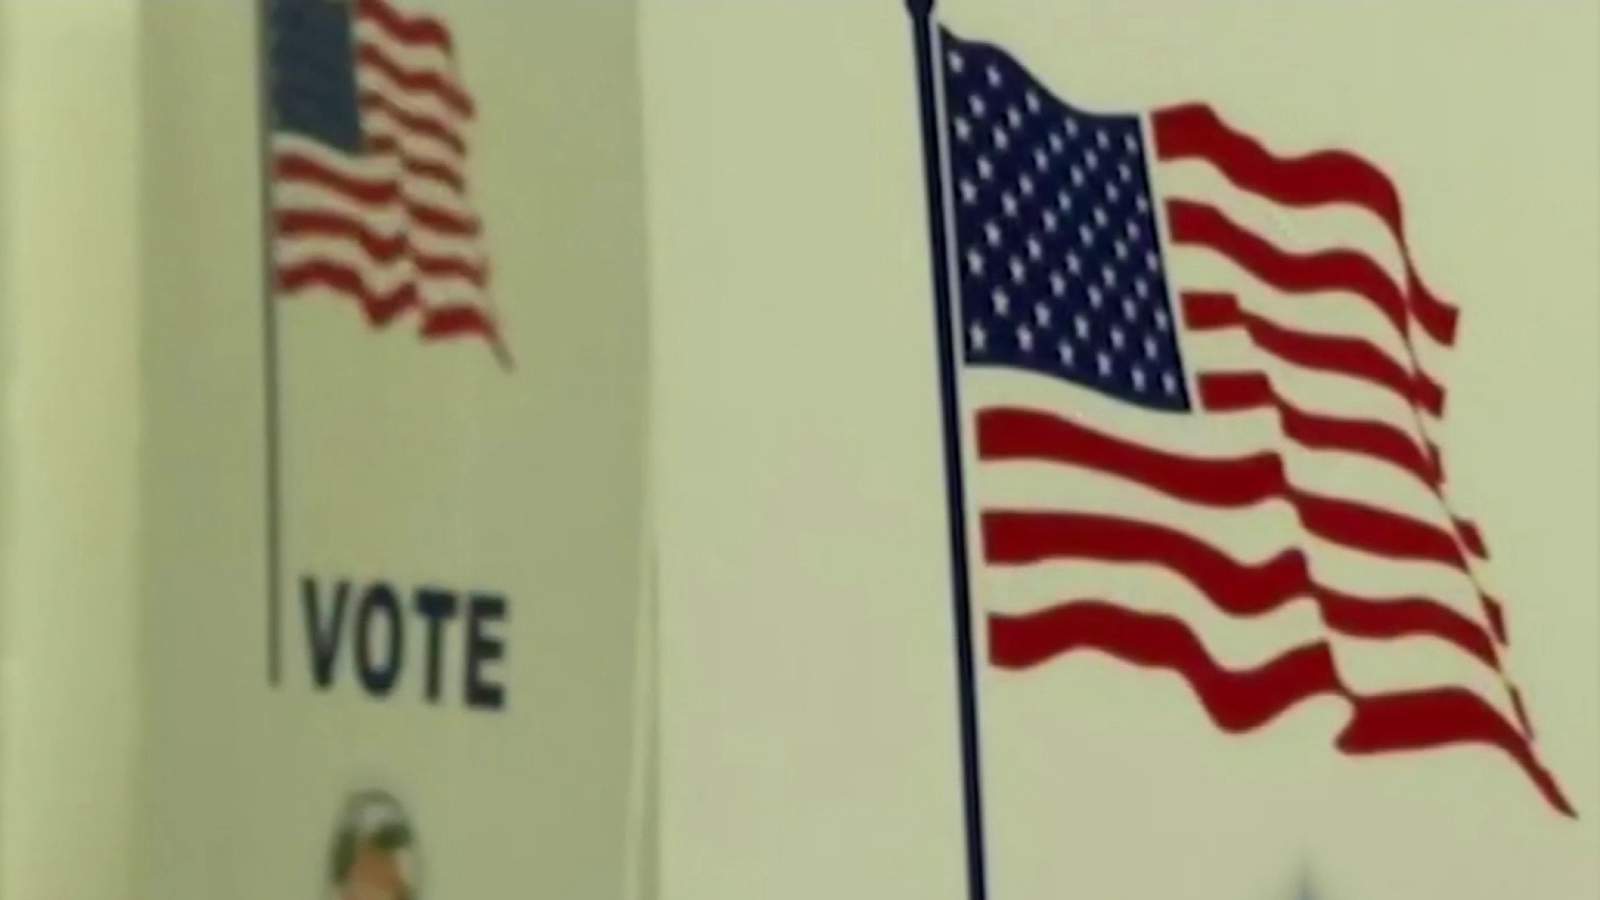 6 Florida constitutional amendments to be on ballot in November